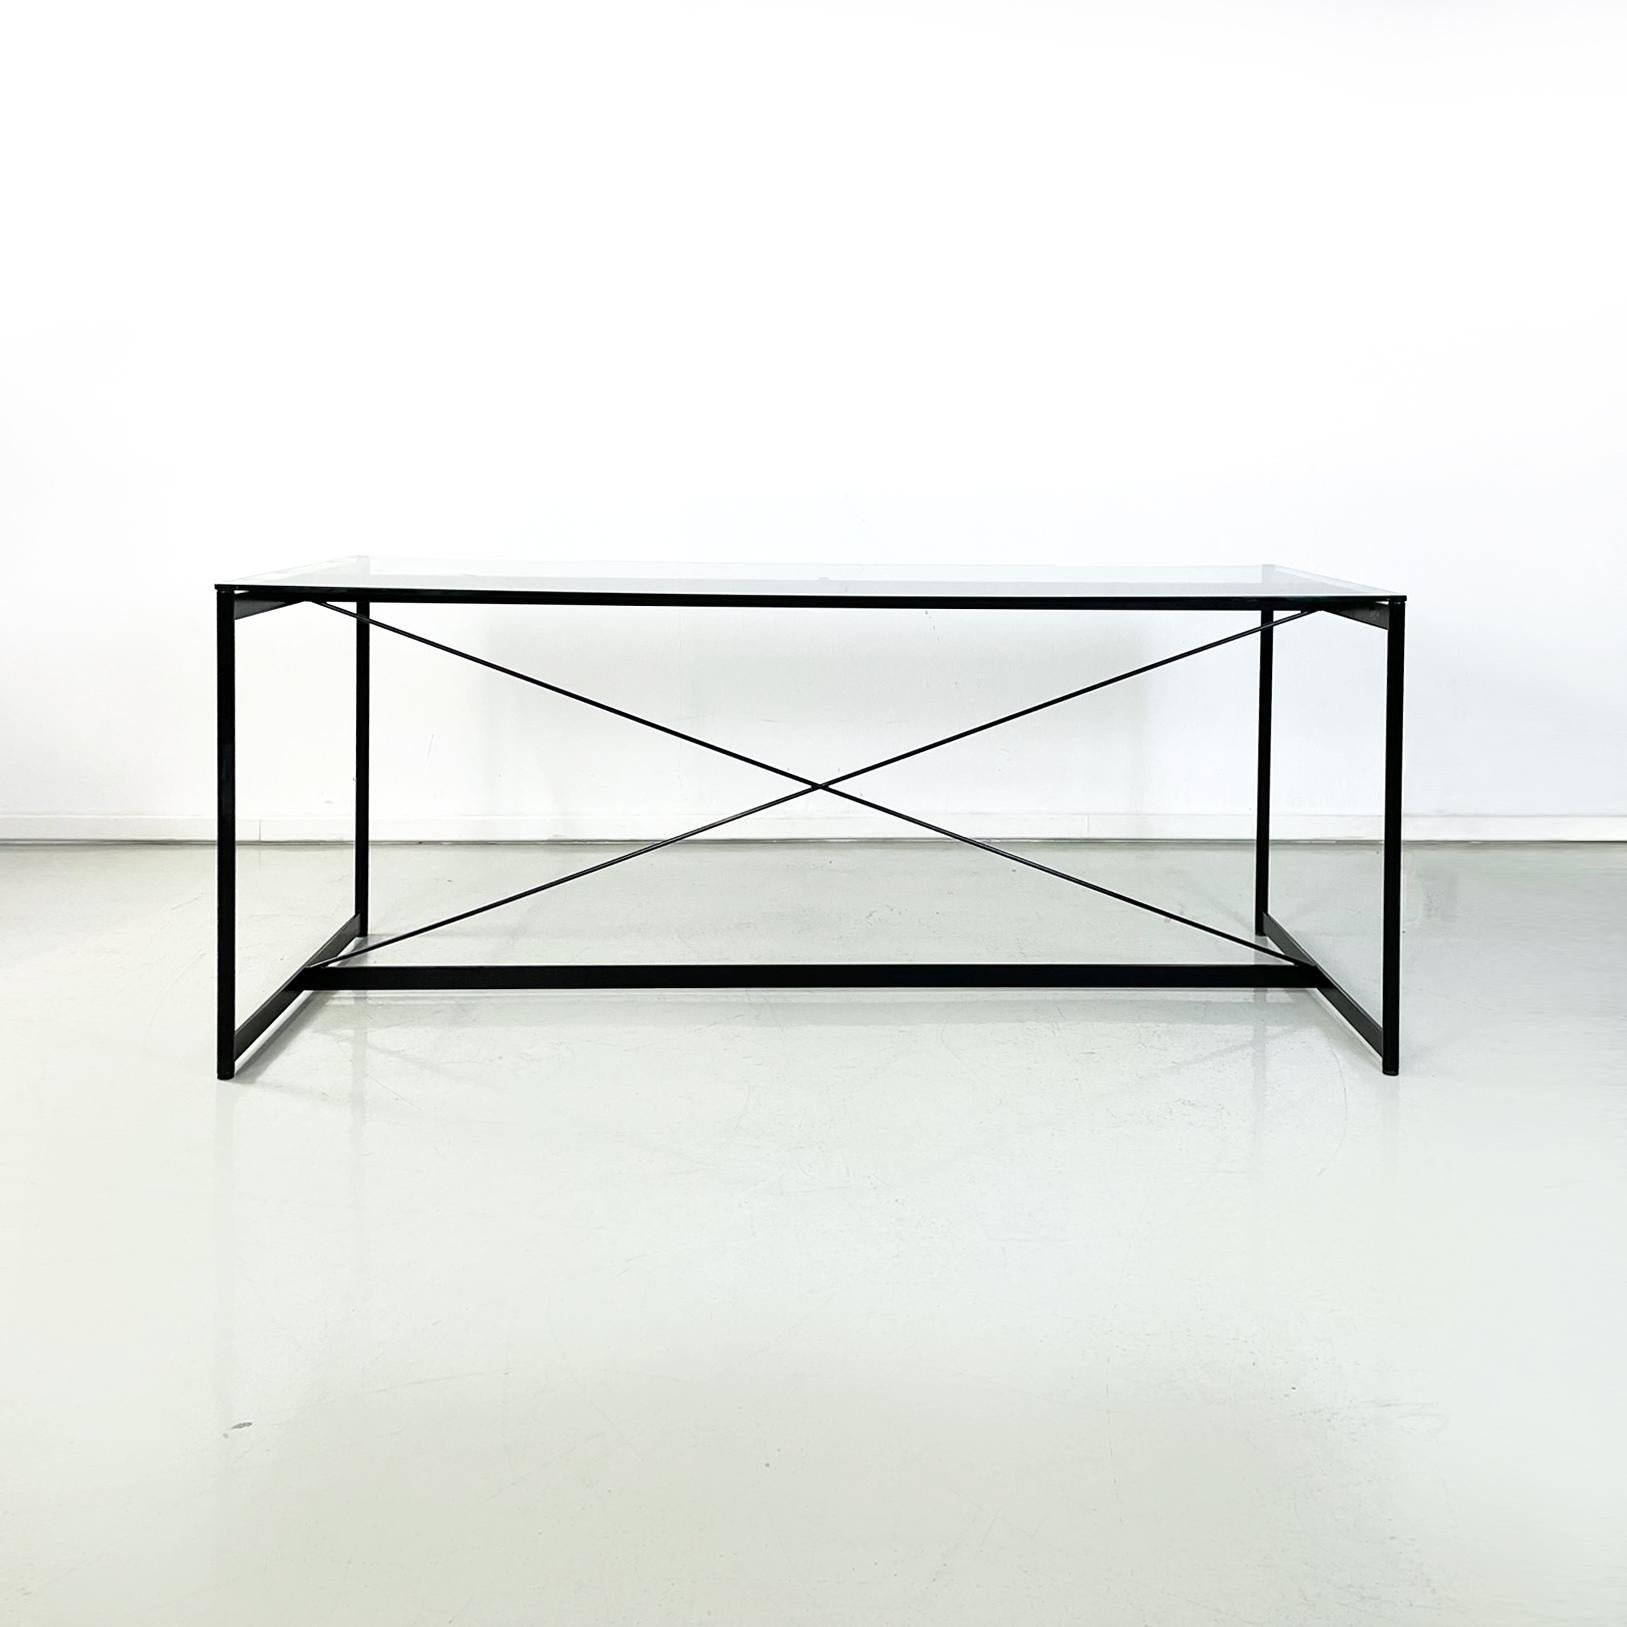 Italian Bauhaus modern Dining table Asnago by Mario Asnago for Pallucco, 1990s
Dining table mod. Asnago with rectangular top in tempered glass. The structure is entirely in black painted metal with round section legs. In the center of the structure